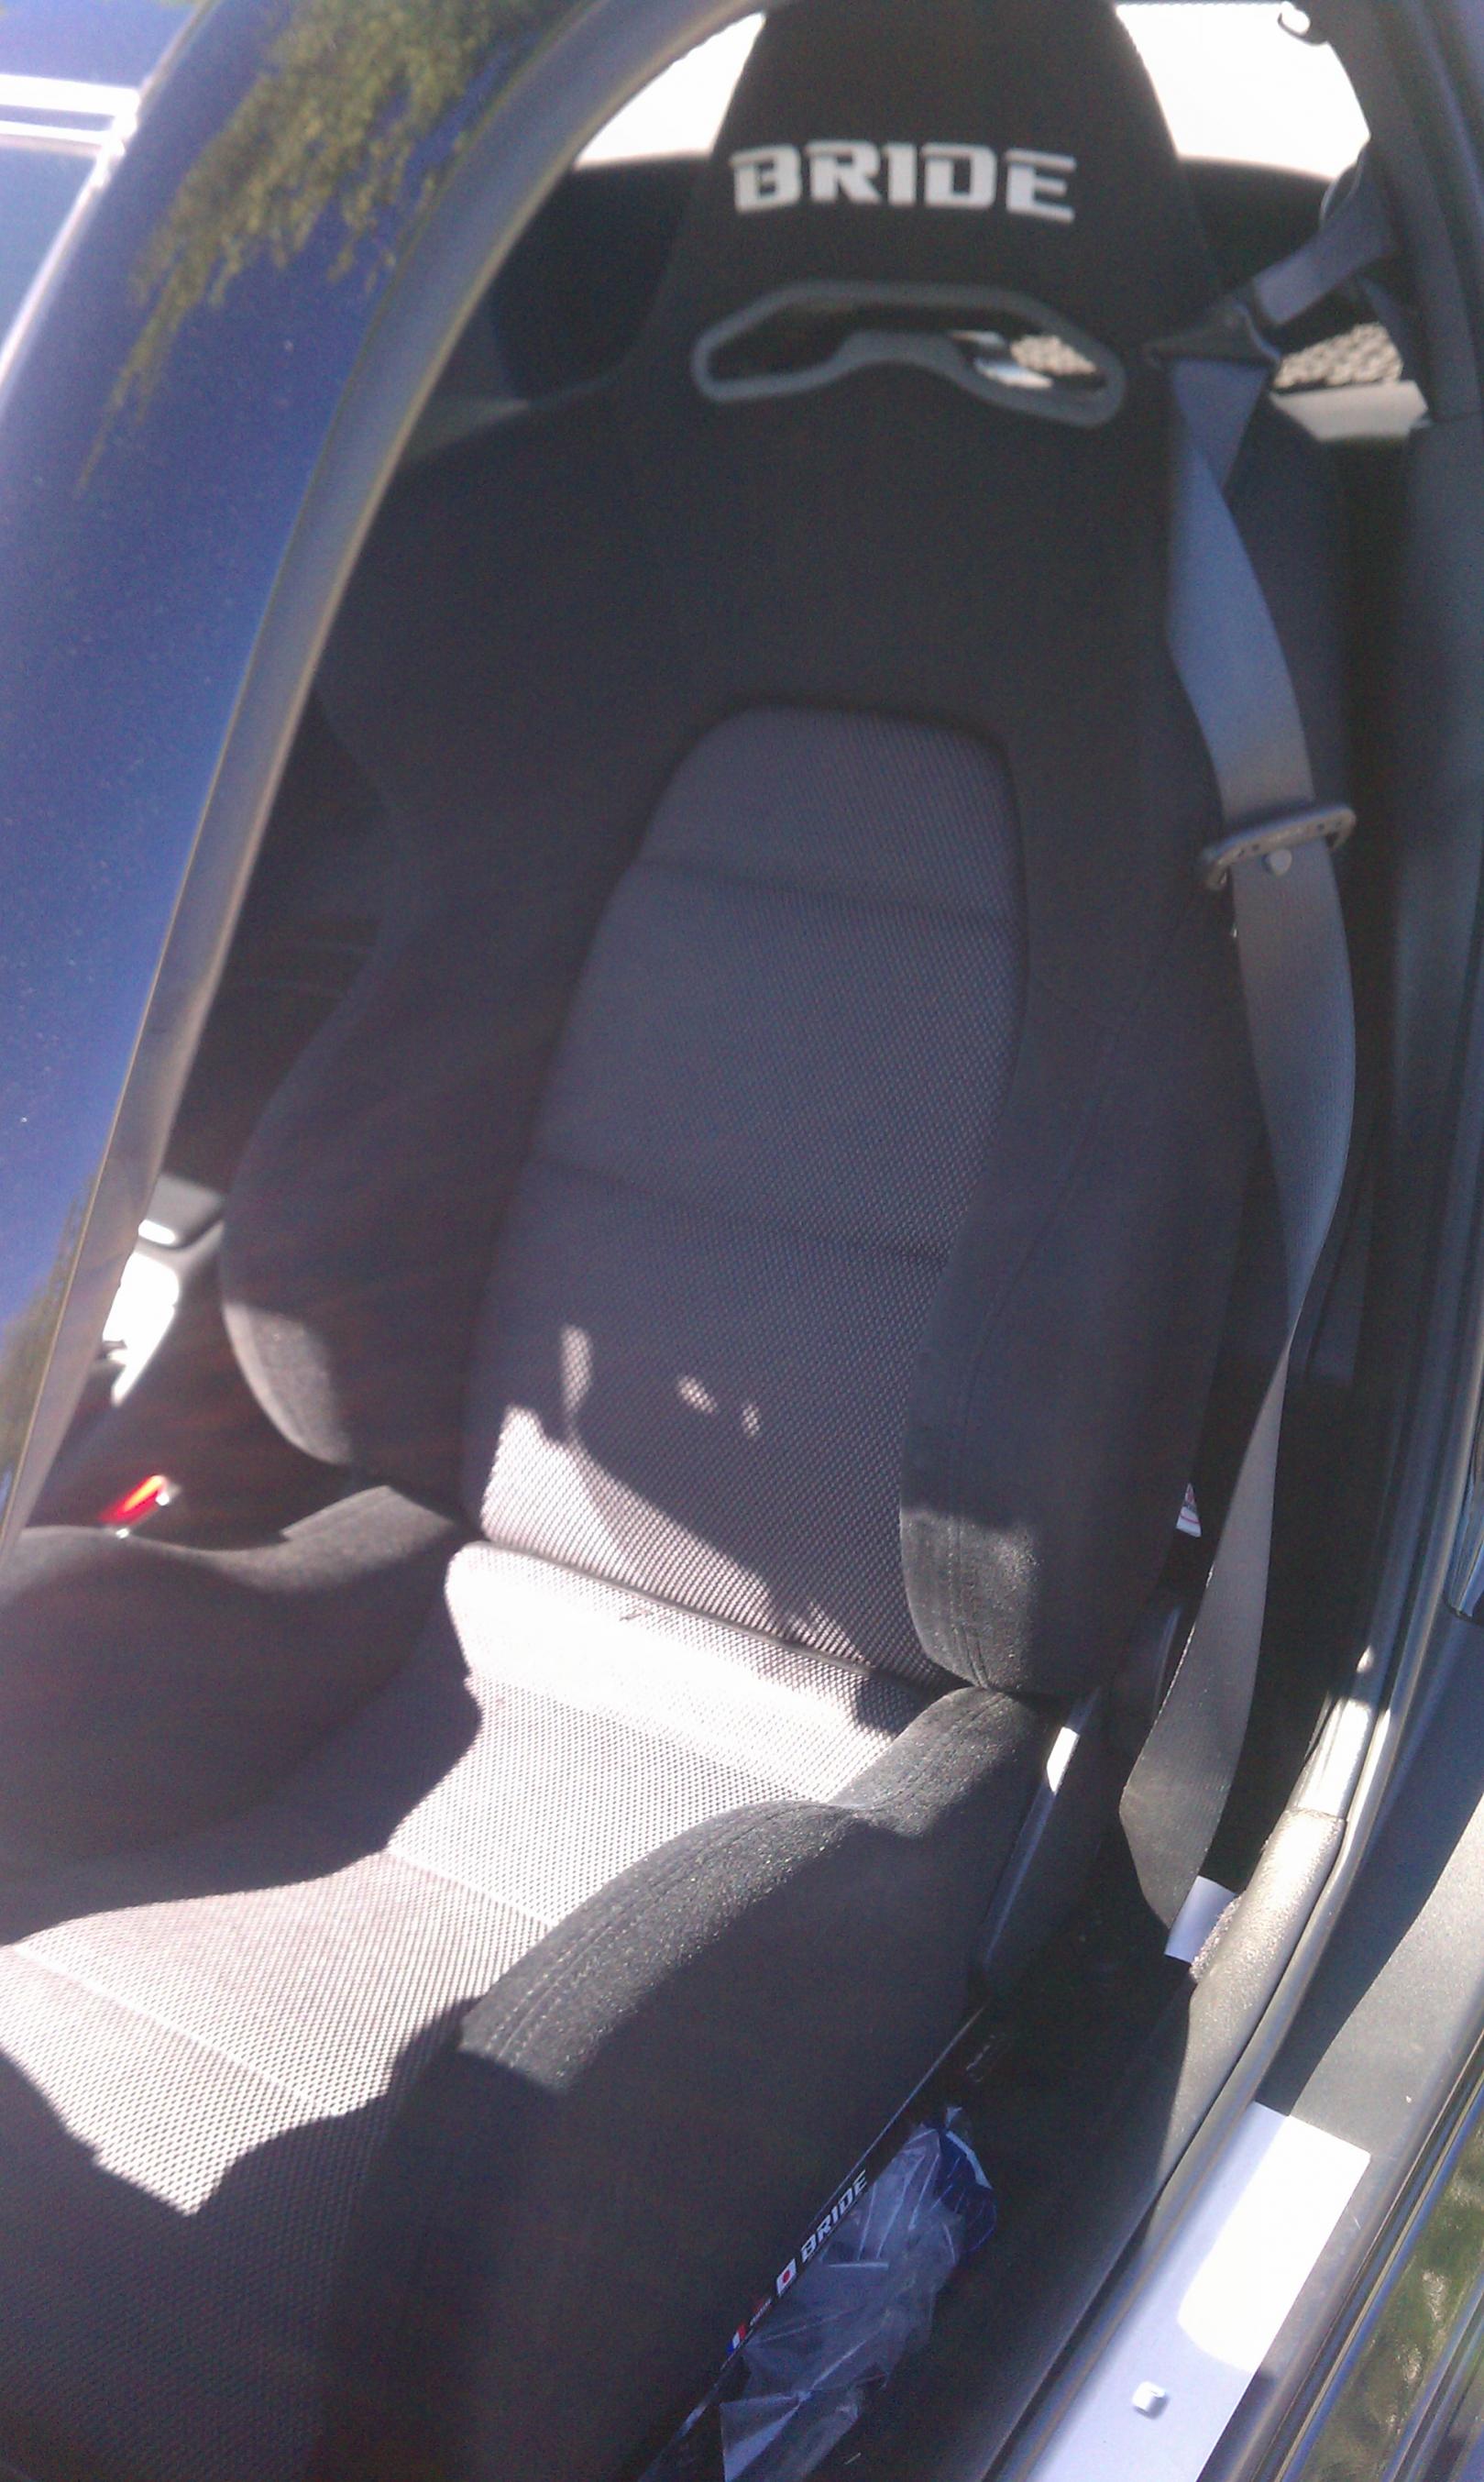 FS/FT: Bride Ergo II Seats W/Rails for Your 06-08 Nismo or Leather Seats.